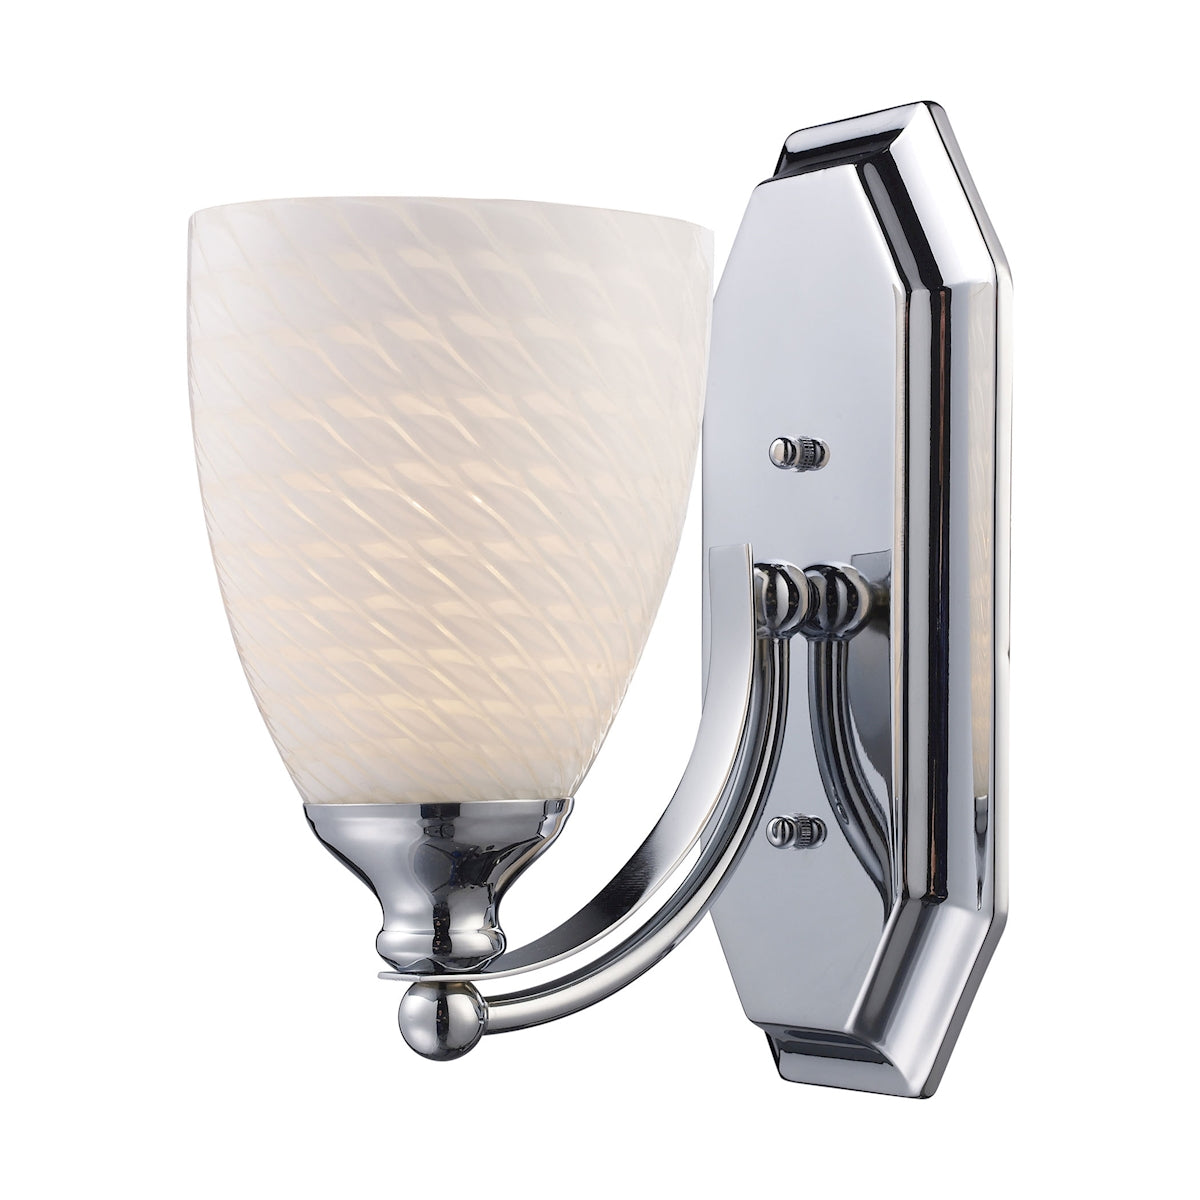 ELK Lighting 570-1C-WS Mix and Match Vanity 1-Light Wall Lamp in Chrome with White Swirl Glass